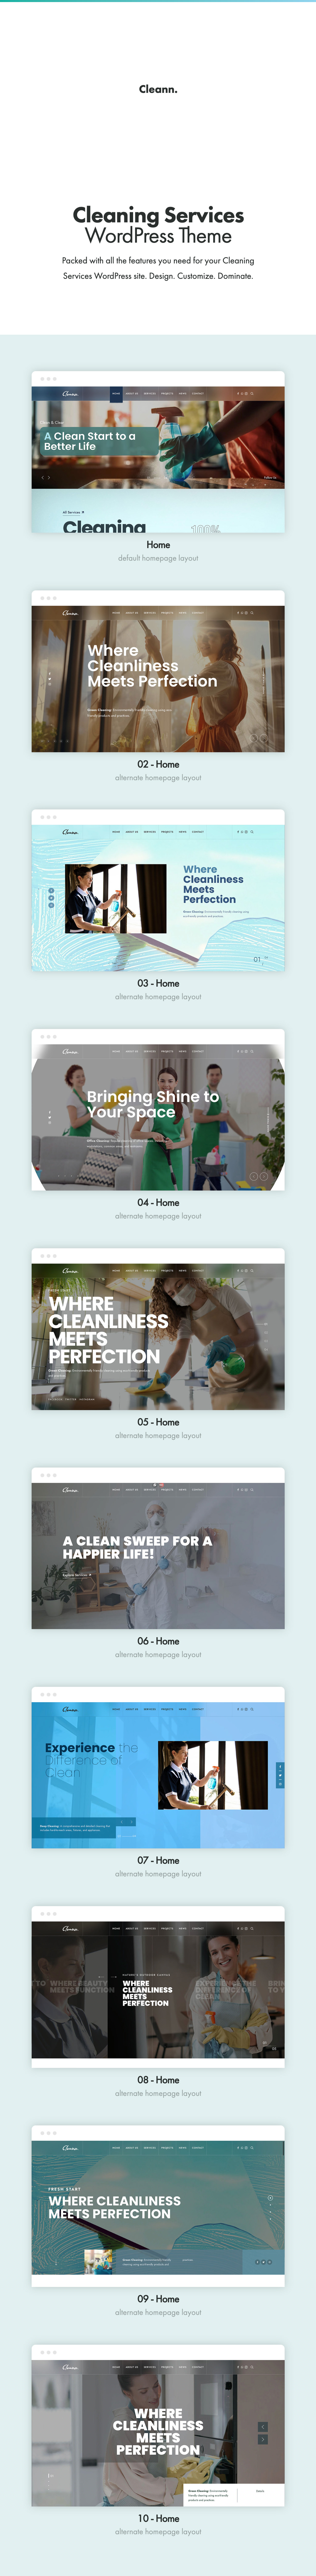 Cleann - Cleaning Services WordPress theme by pixelwars 